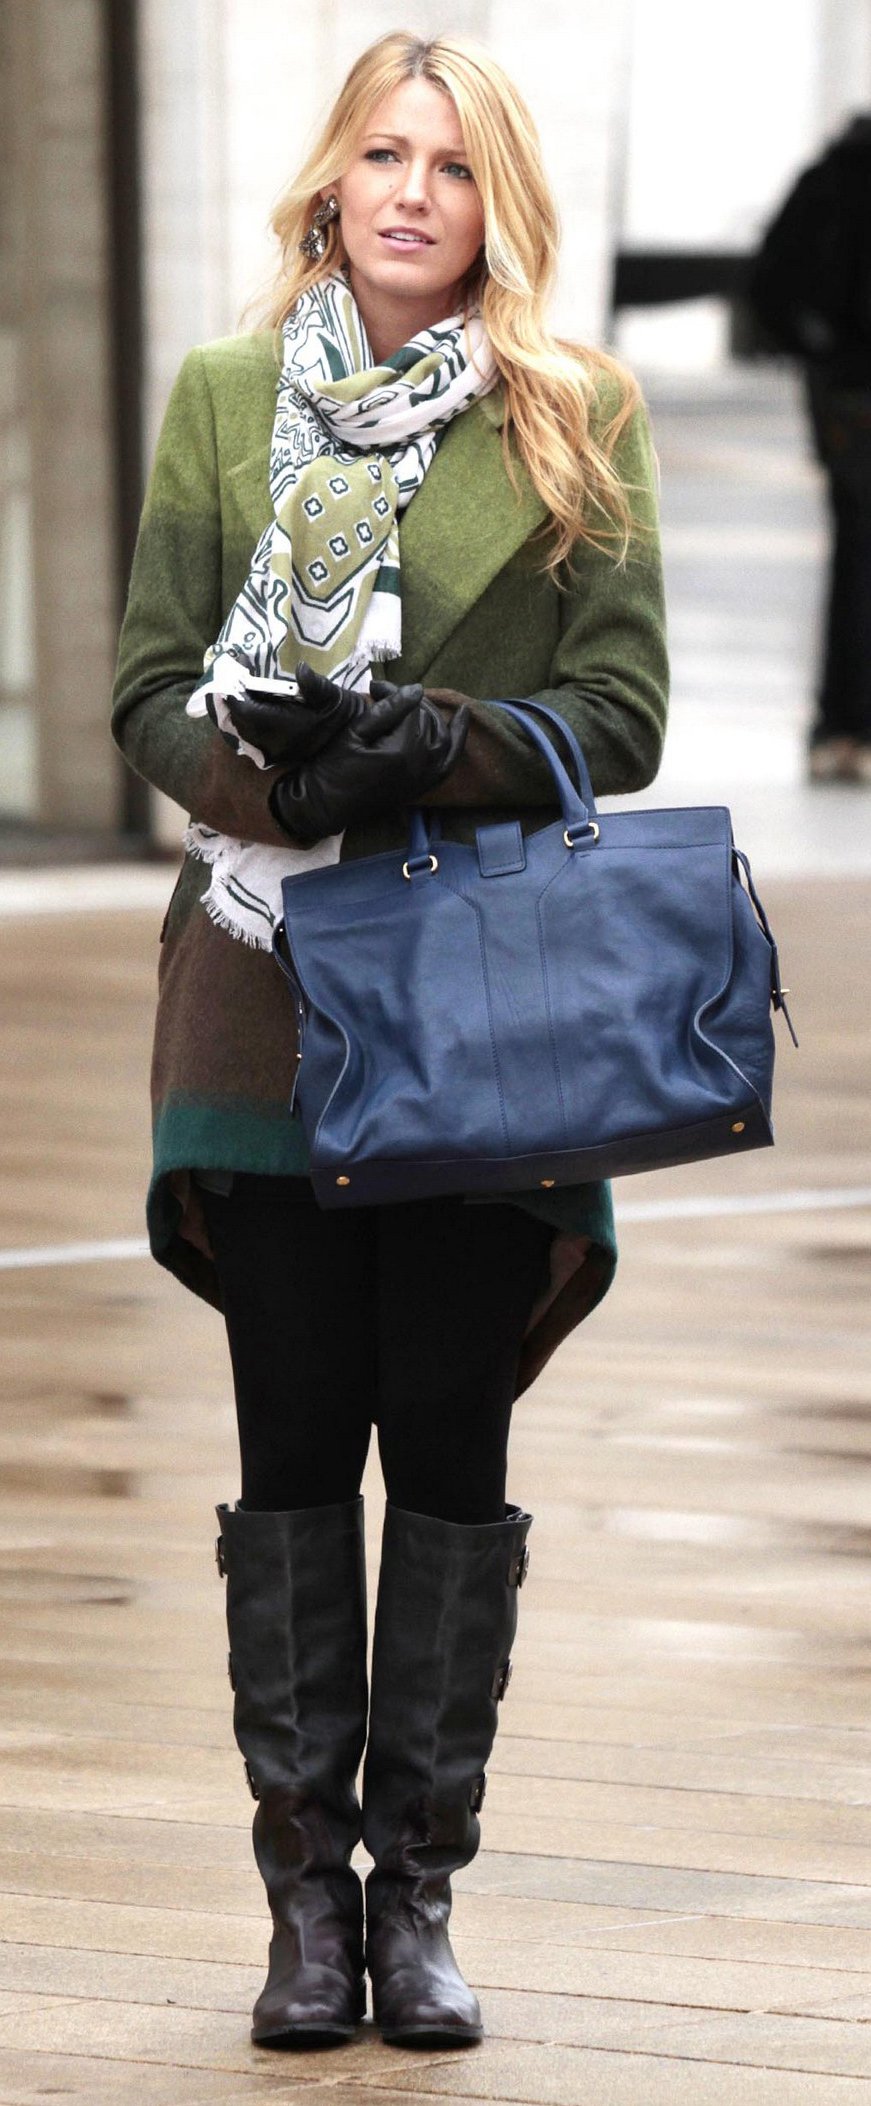 Serena's green coat and scarf with blue handbag on Gossip Girl